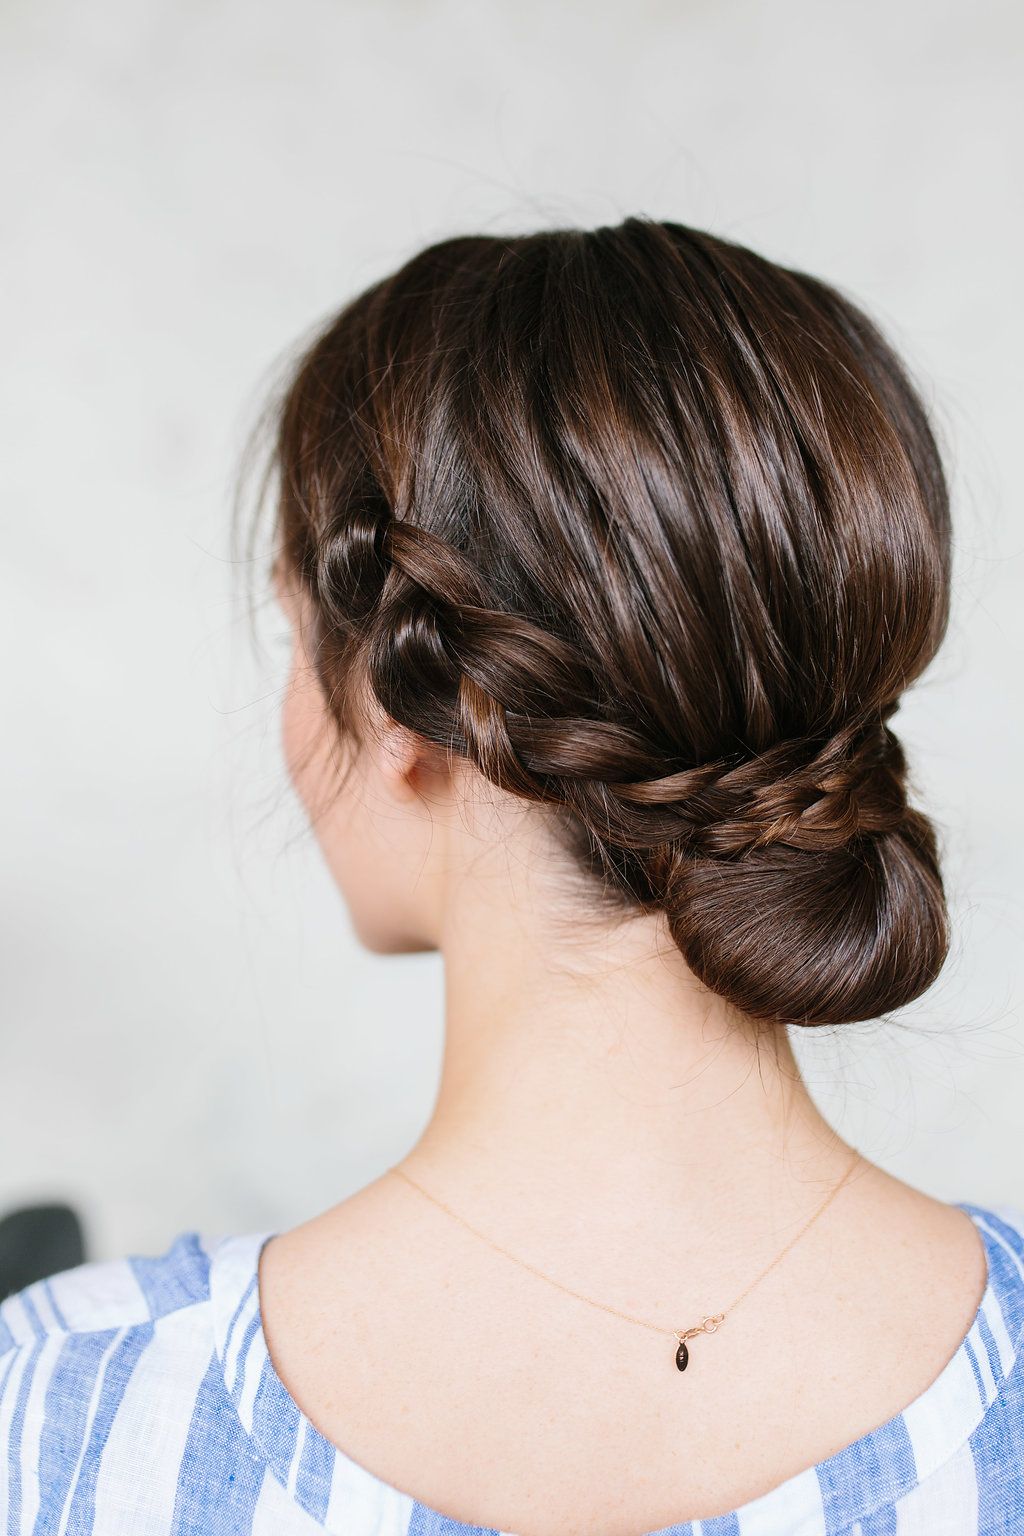 How To Do A Braided Bun Hair Tutorial – The Effortless Chic With Regard To Most Recent Plaited Low Bun Braid Hairstyles (View 17 of 20)